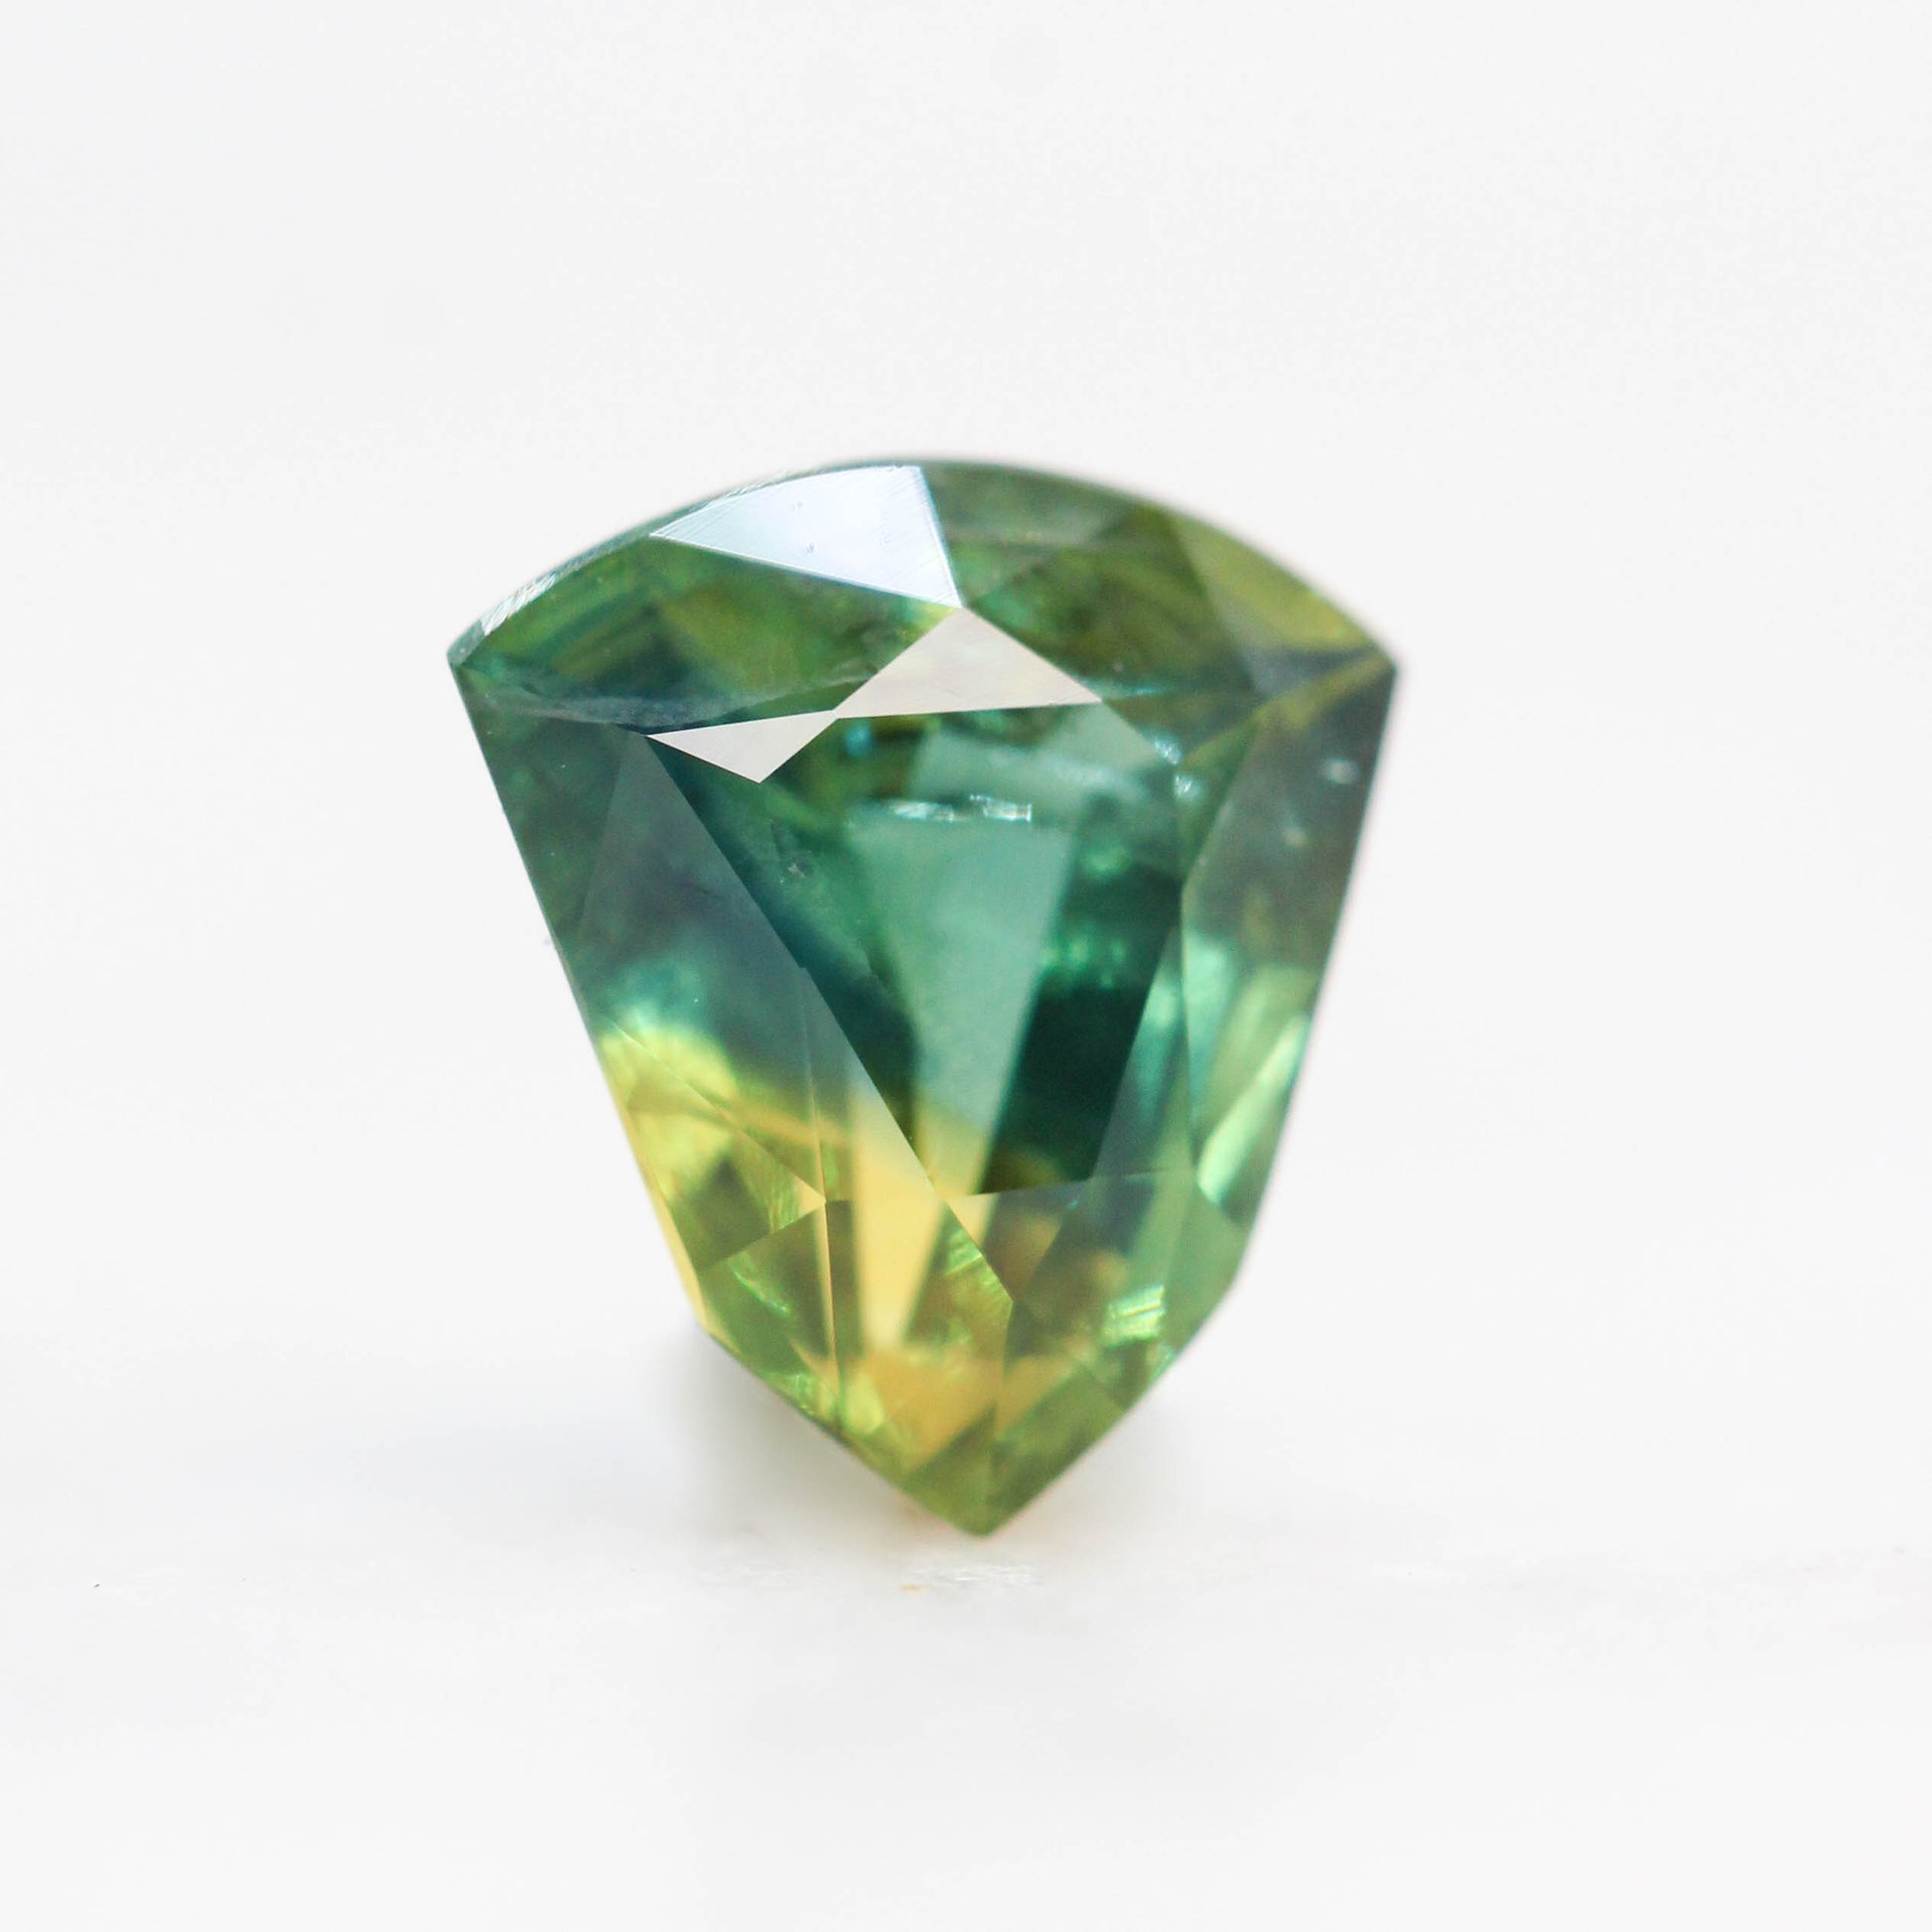 1.12 Carat BiColor Green & Yellow Shield Cut Sapphire for Custom Work - Inventory Code GYS112 - Midwinter Co. Alternative Bridal Rings and Modern Fine Jewelry